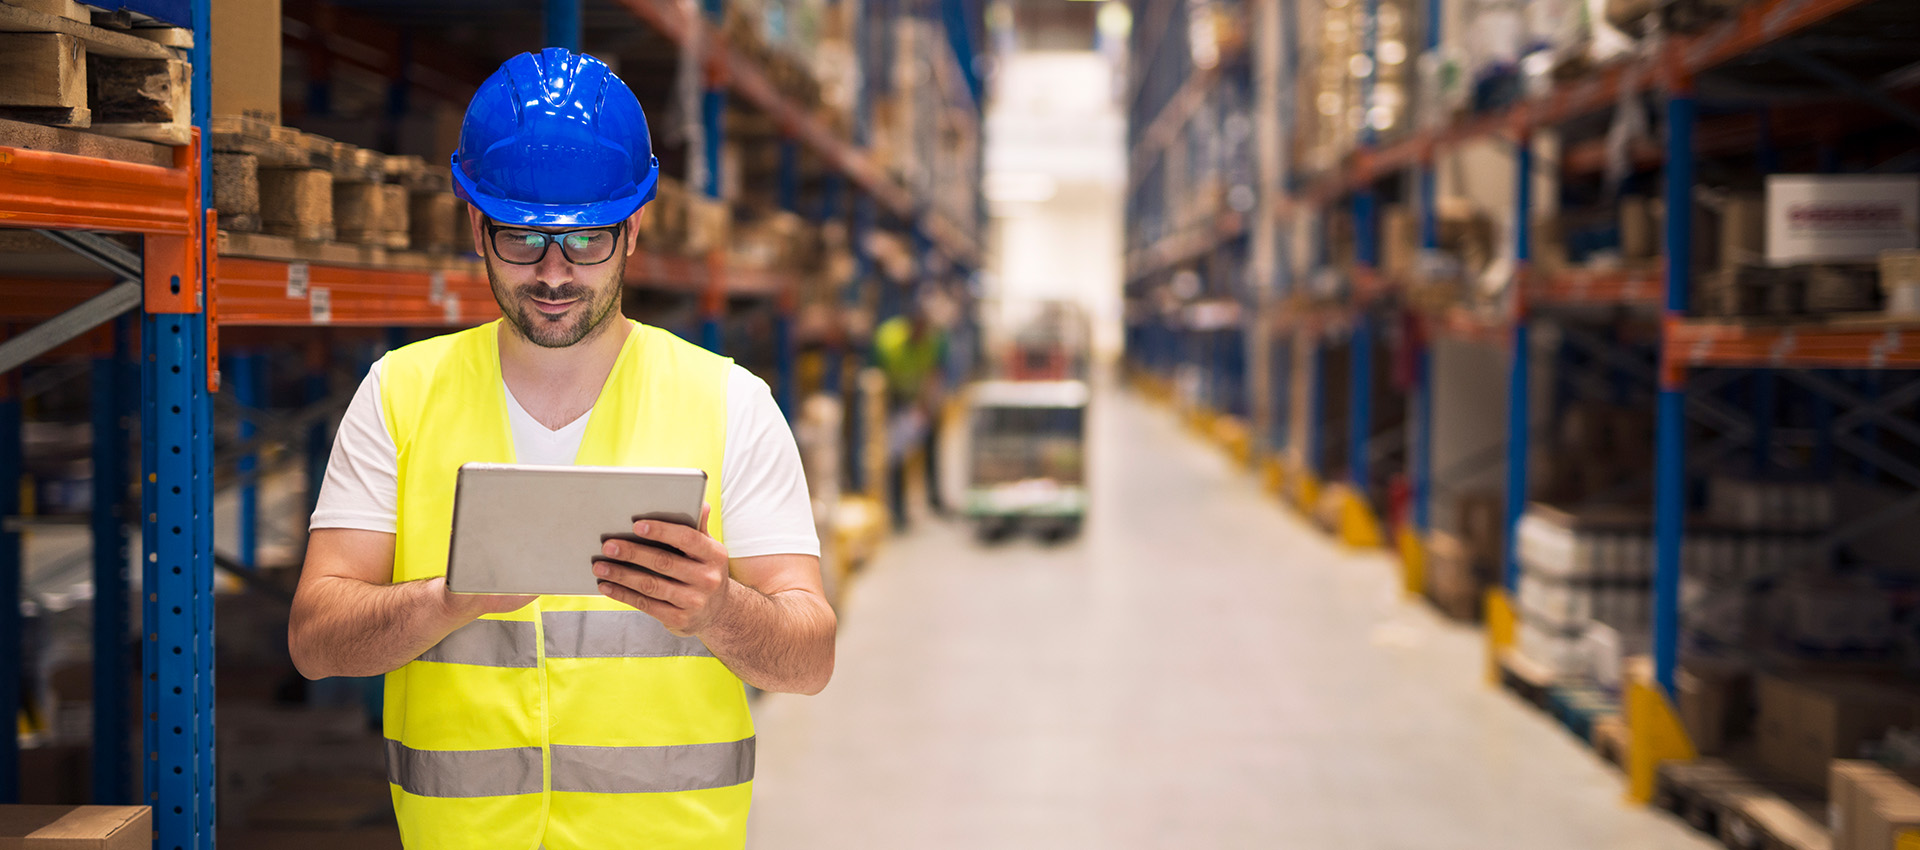 5 Tips to Improve Warehouse Efficiency And Productivity